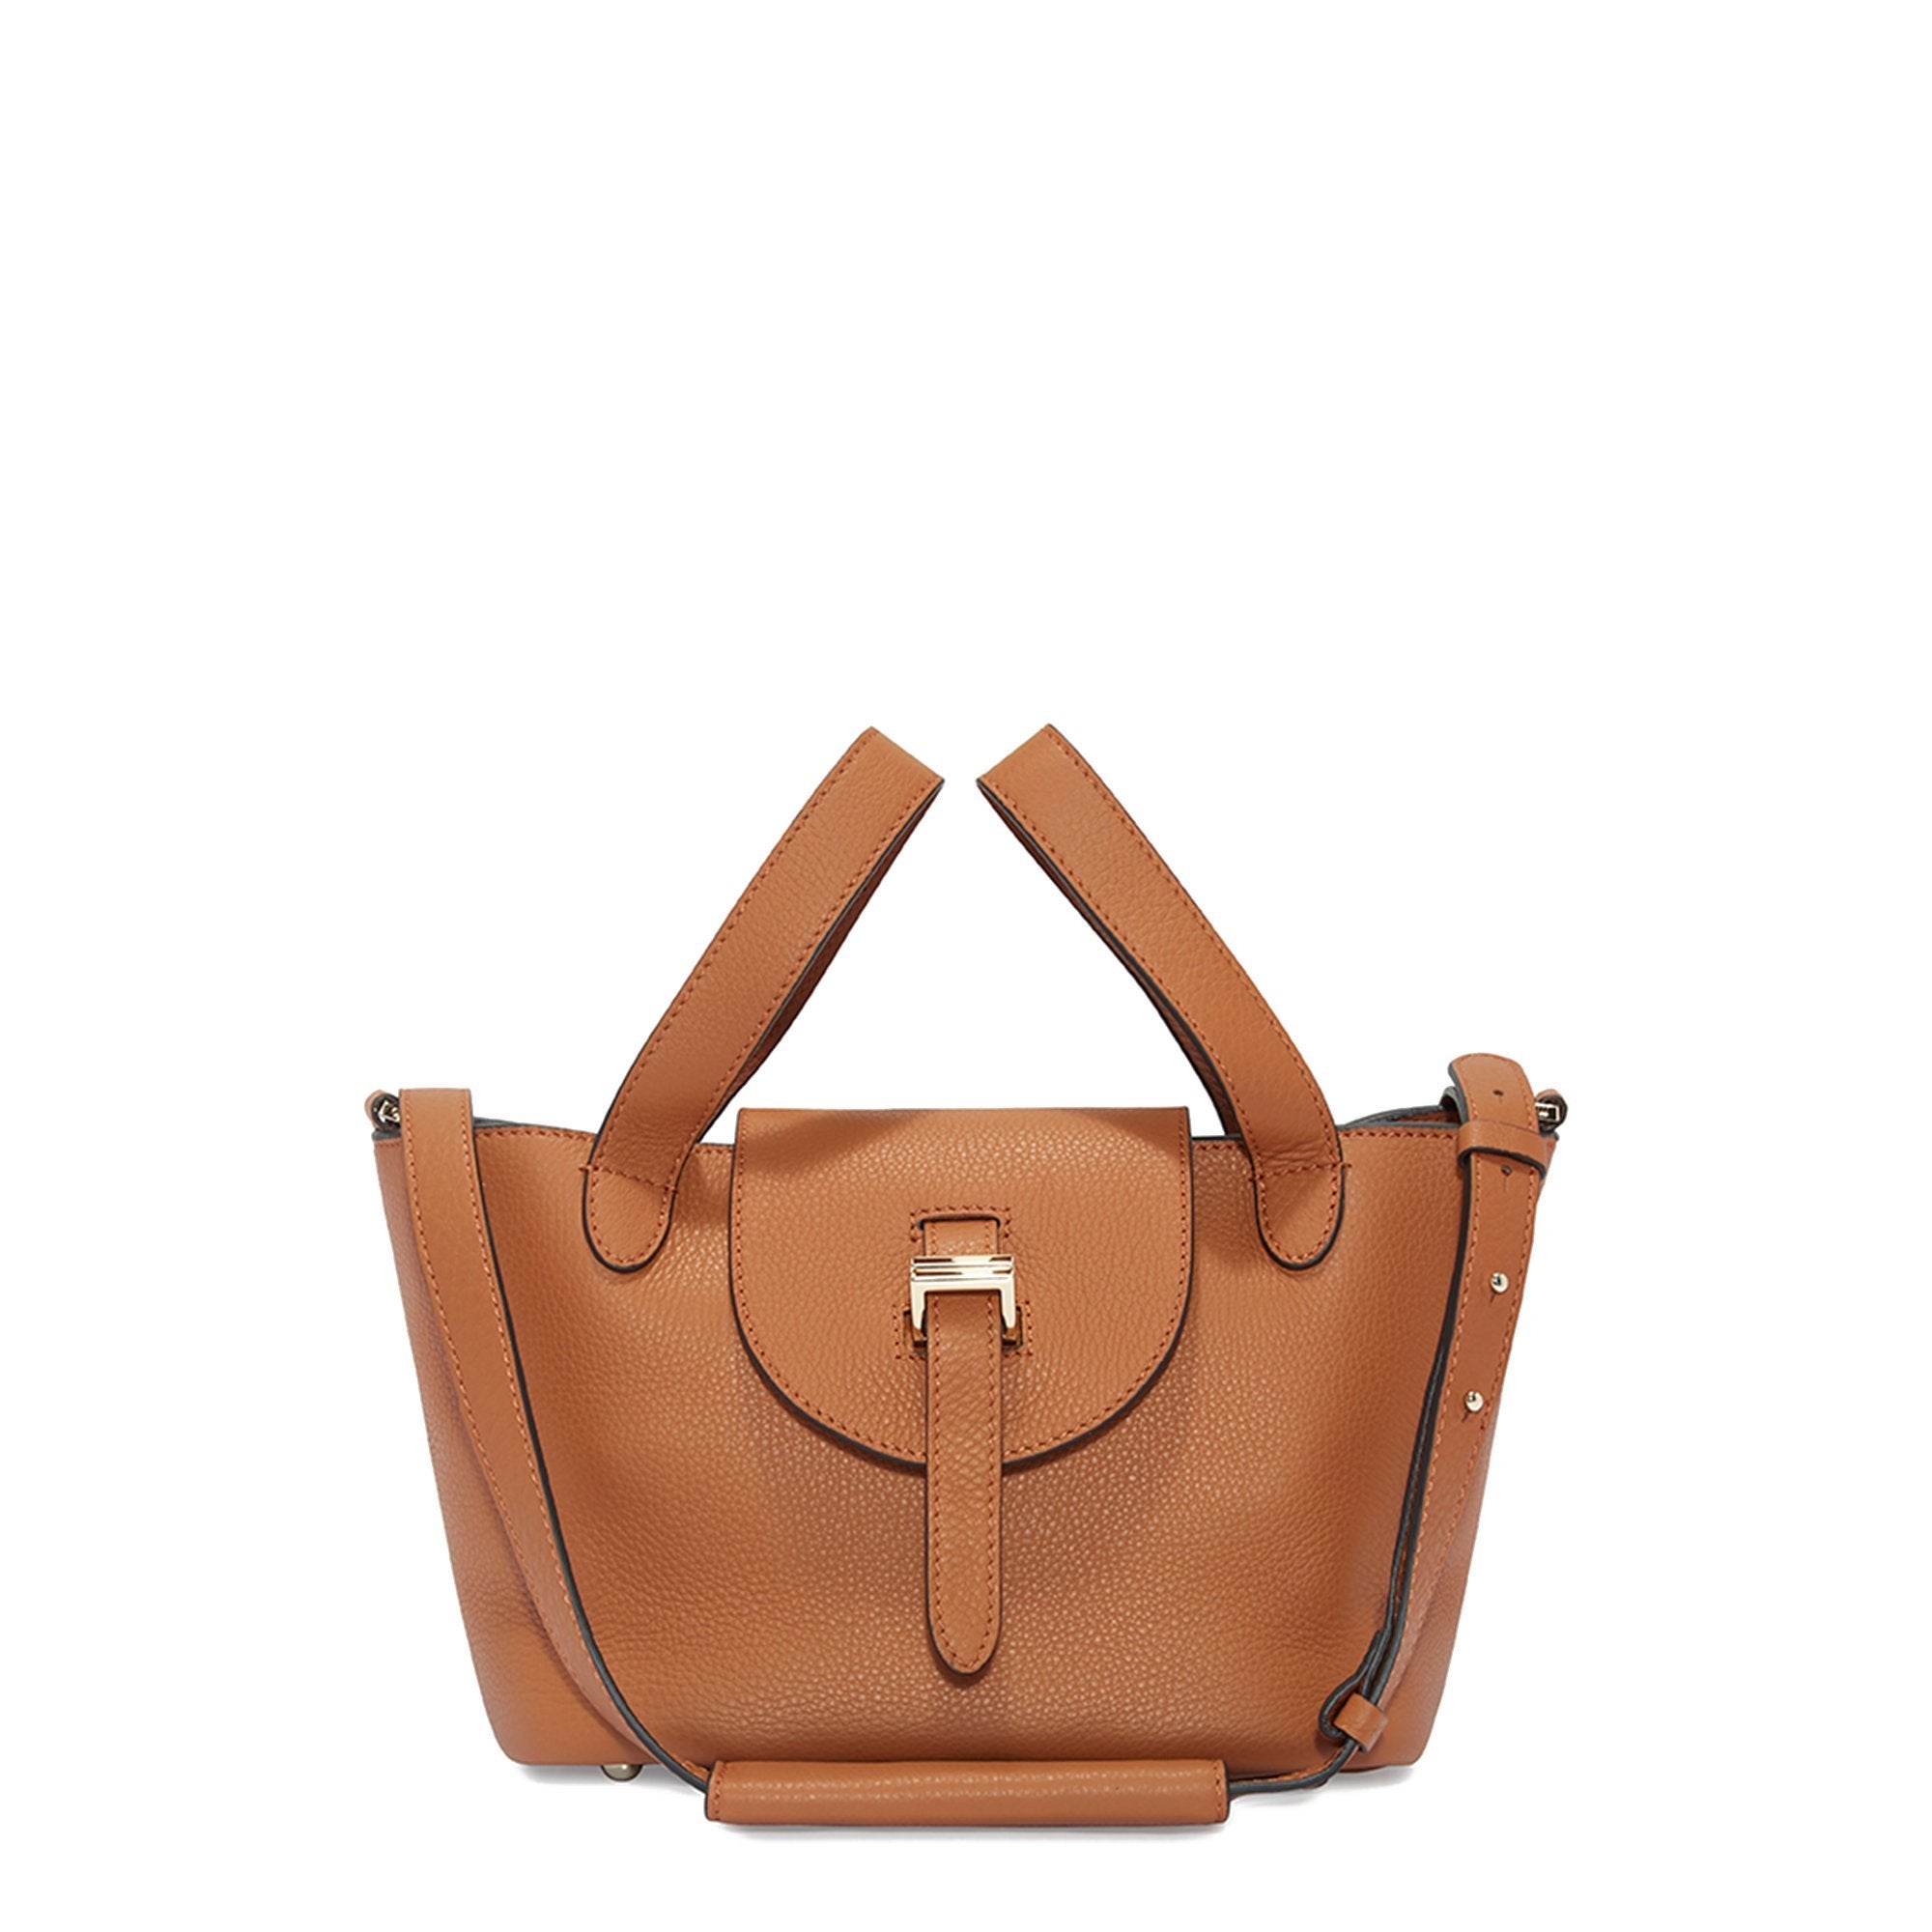 Meli Melo Thela Mini Tan And White With Zip Closure Cross Body Bag For  Women